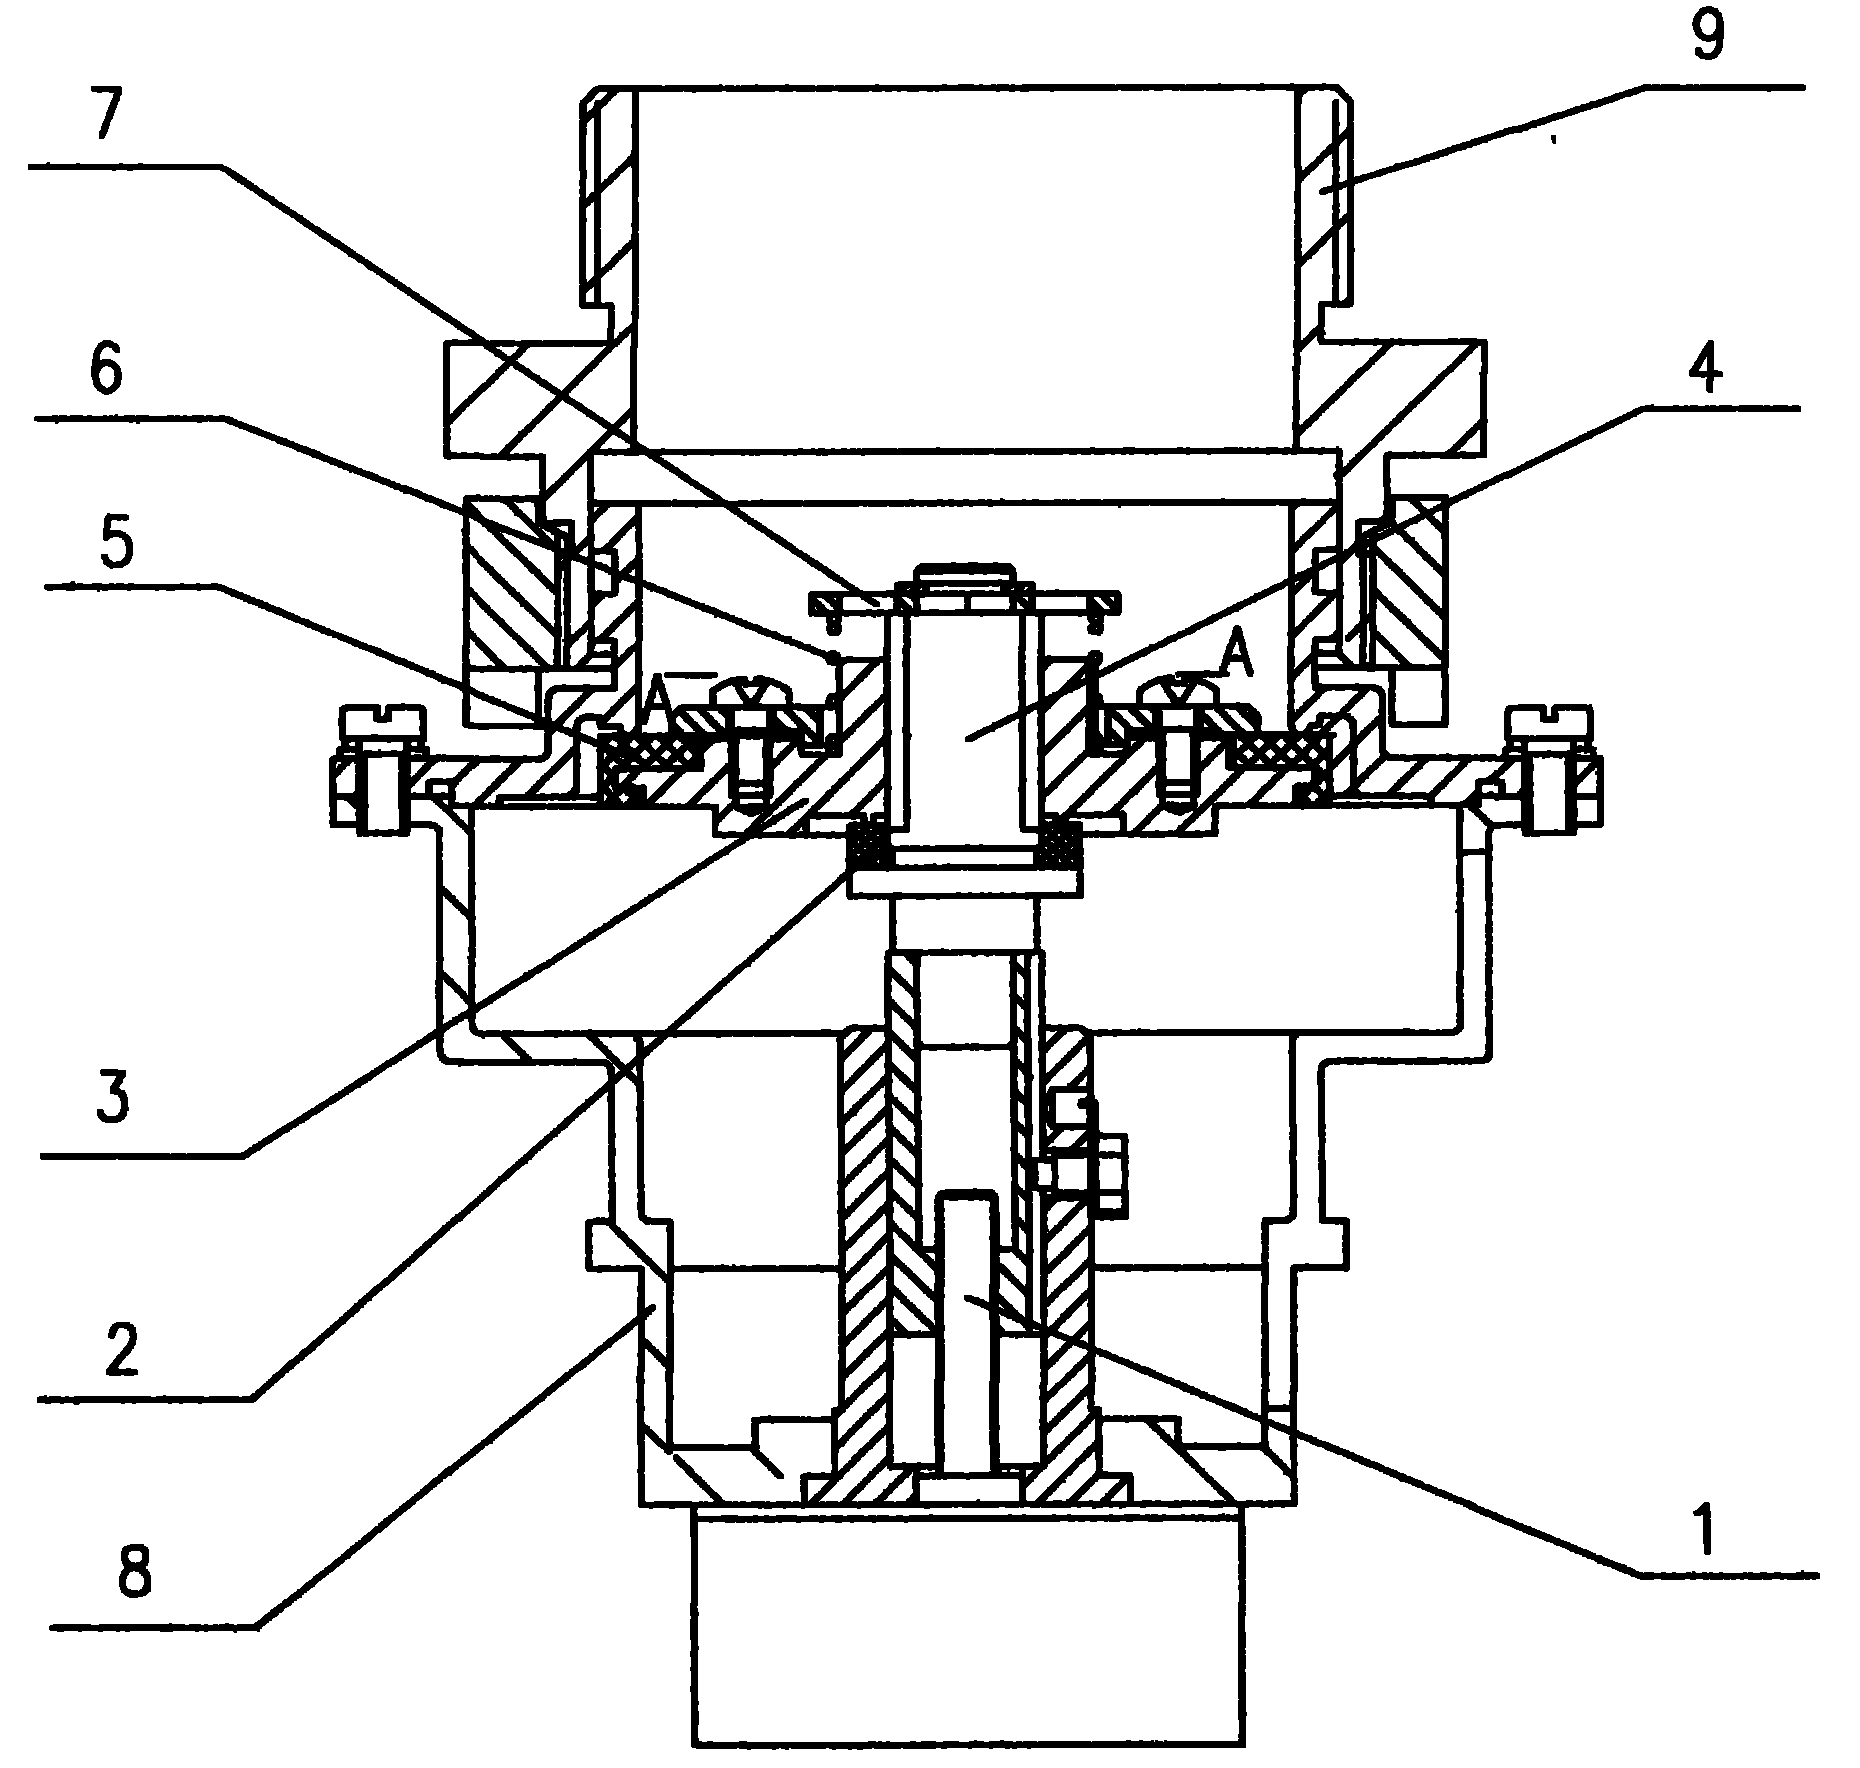 Gas and gas appliance valve pressure relief device